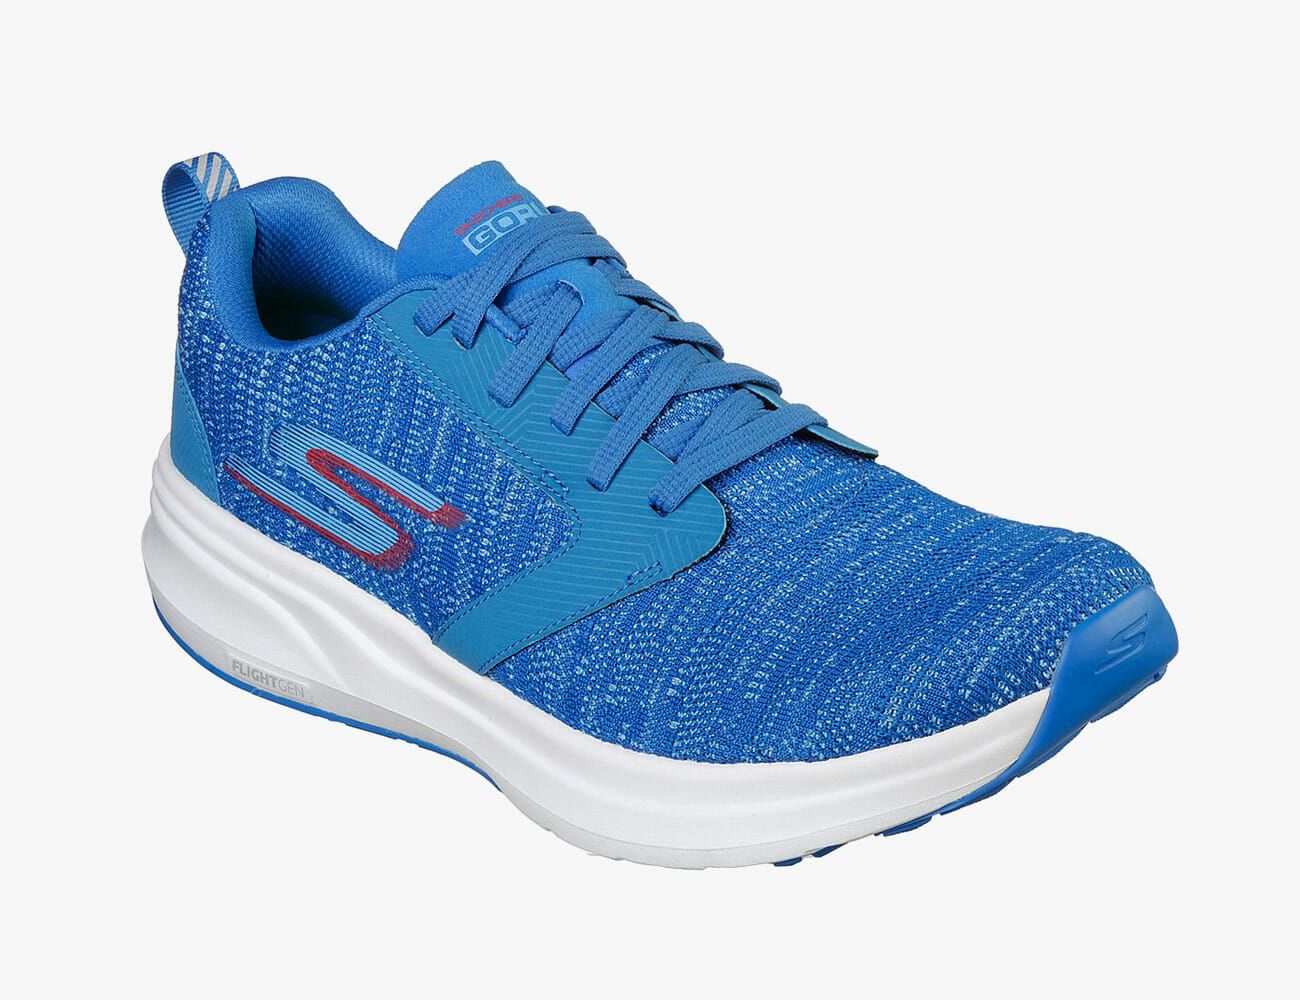 7 Great Pairs of Running Shoes Under $100